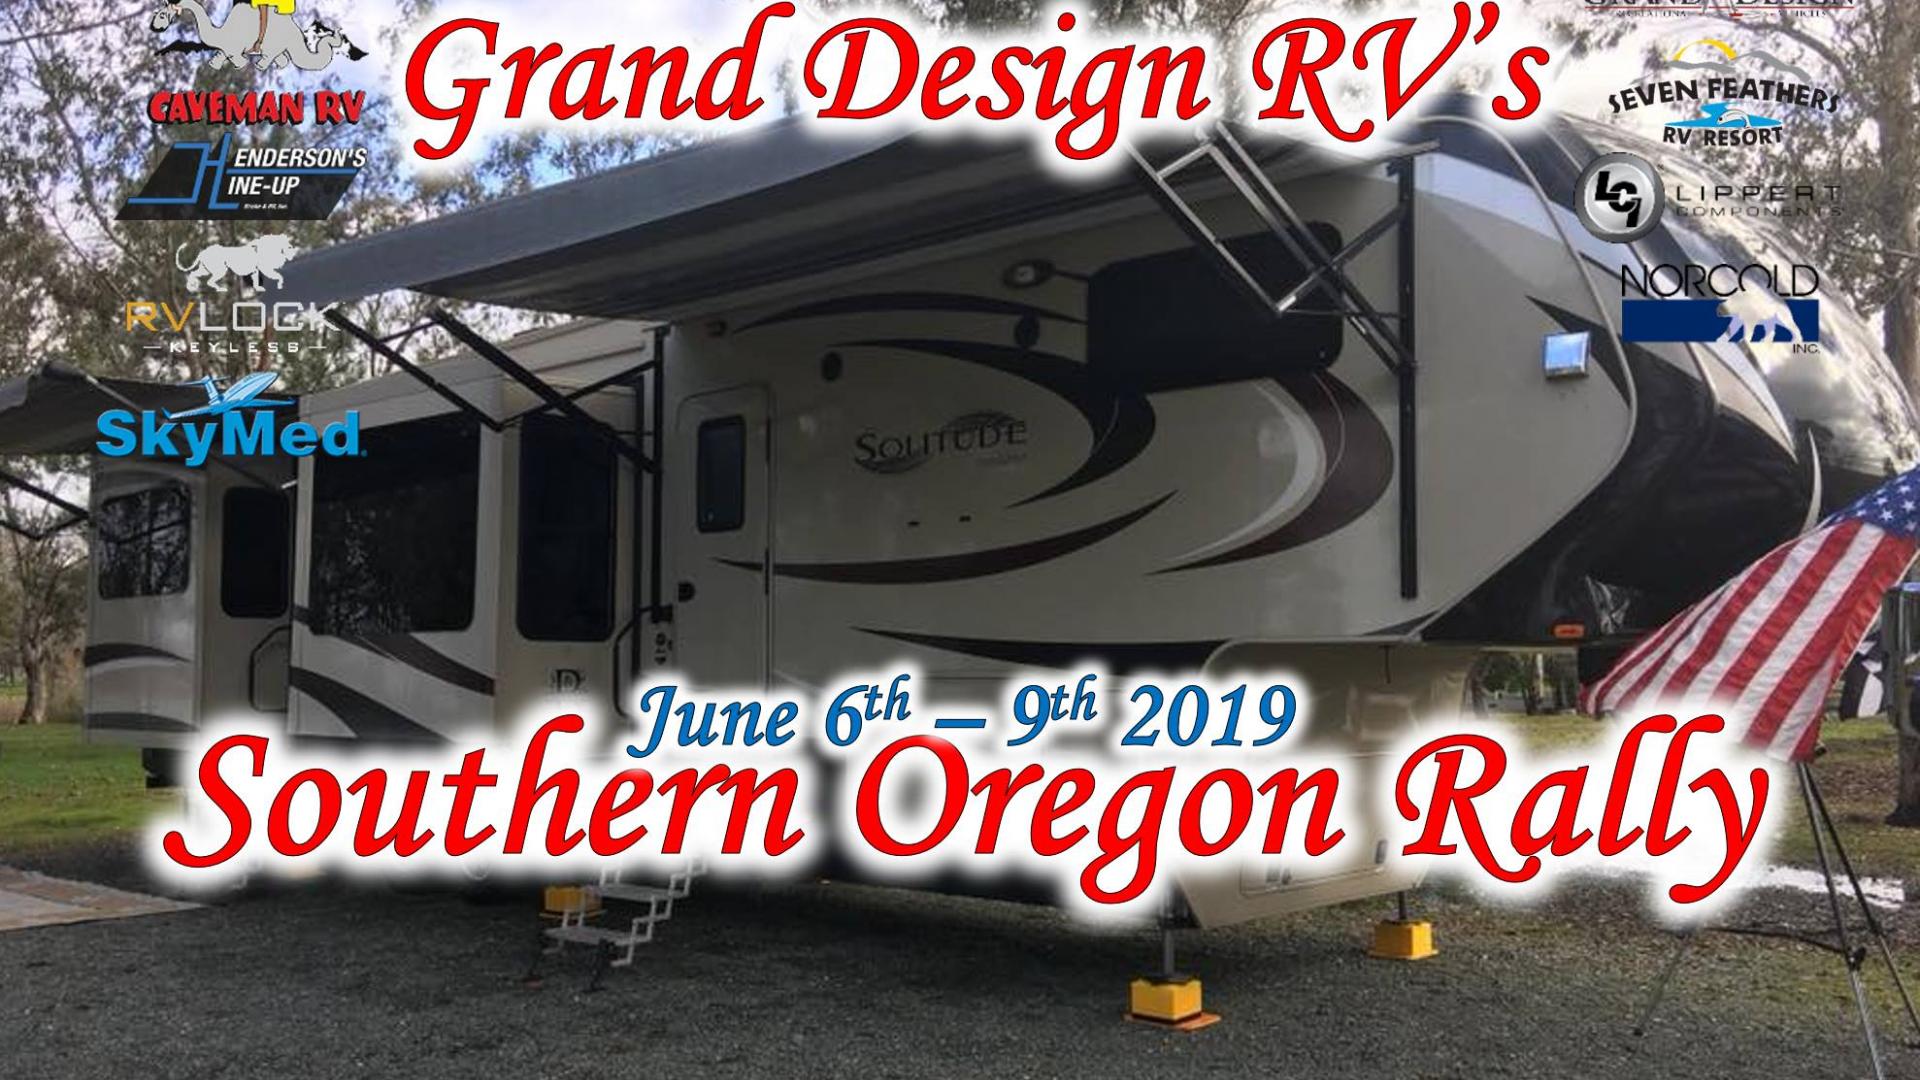 2019 Southern Oregon Grand Design Rally GDRV4Life Your Connection